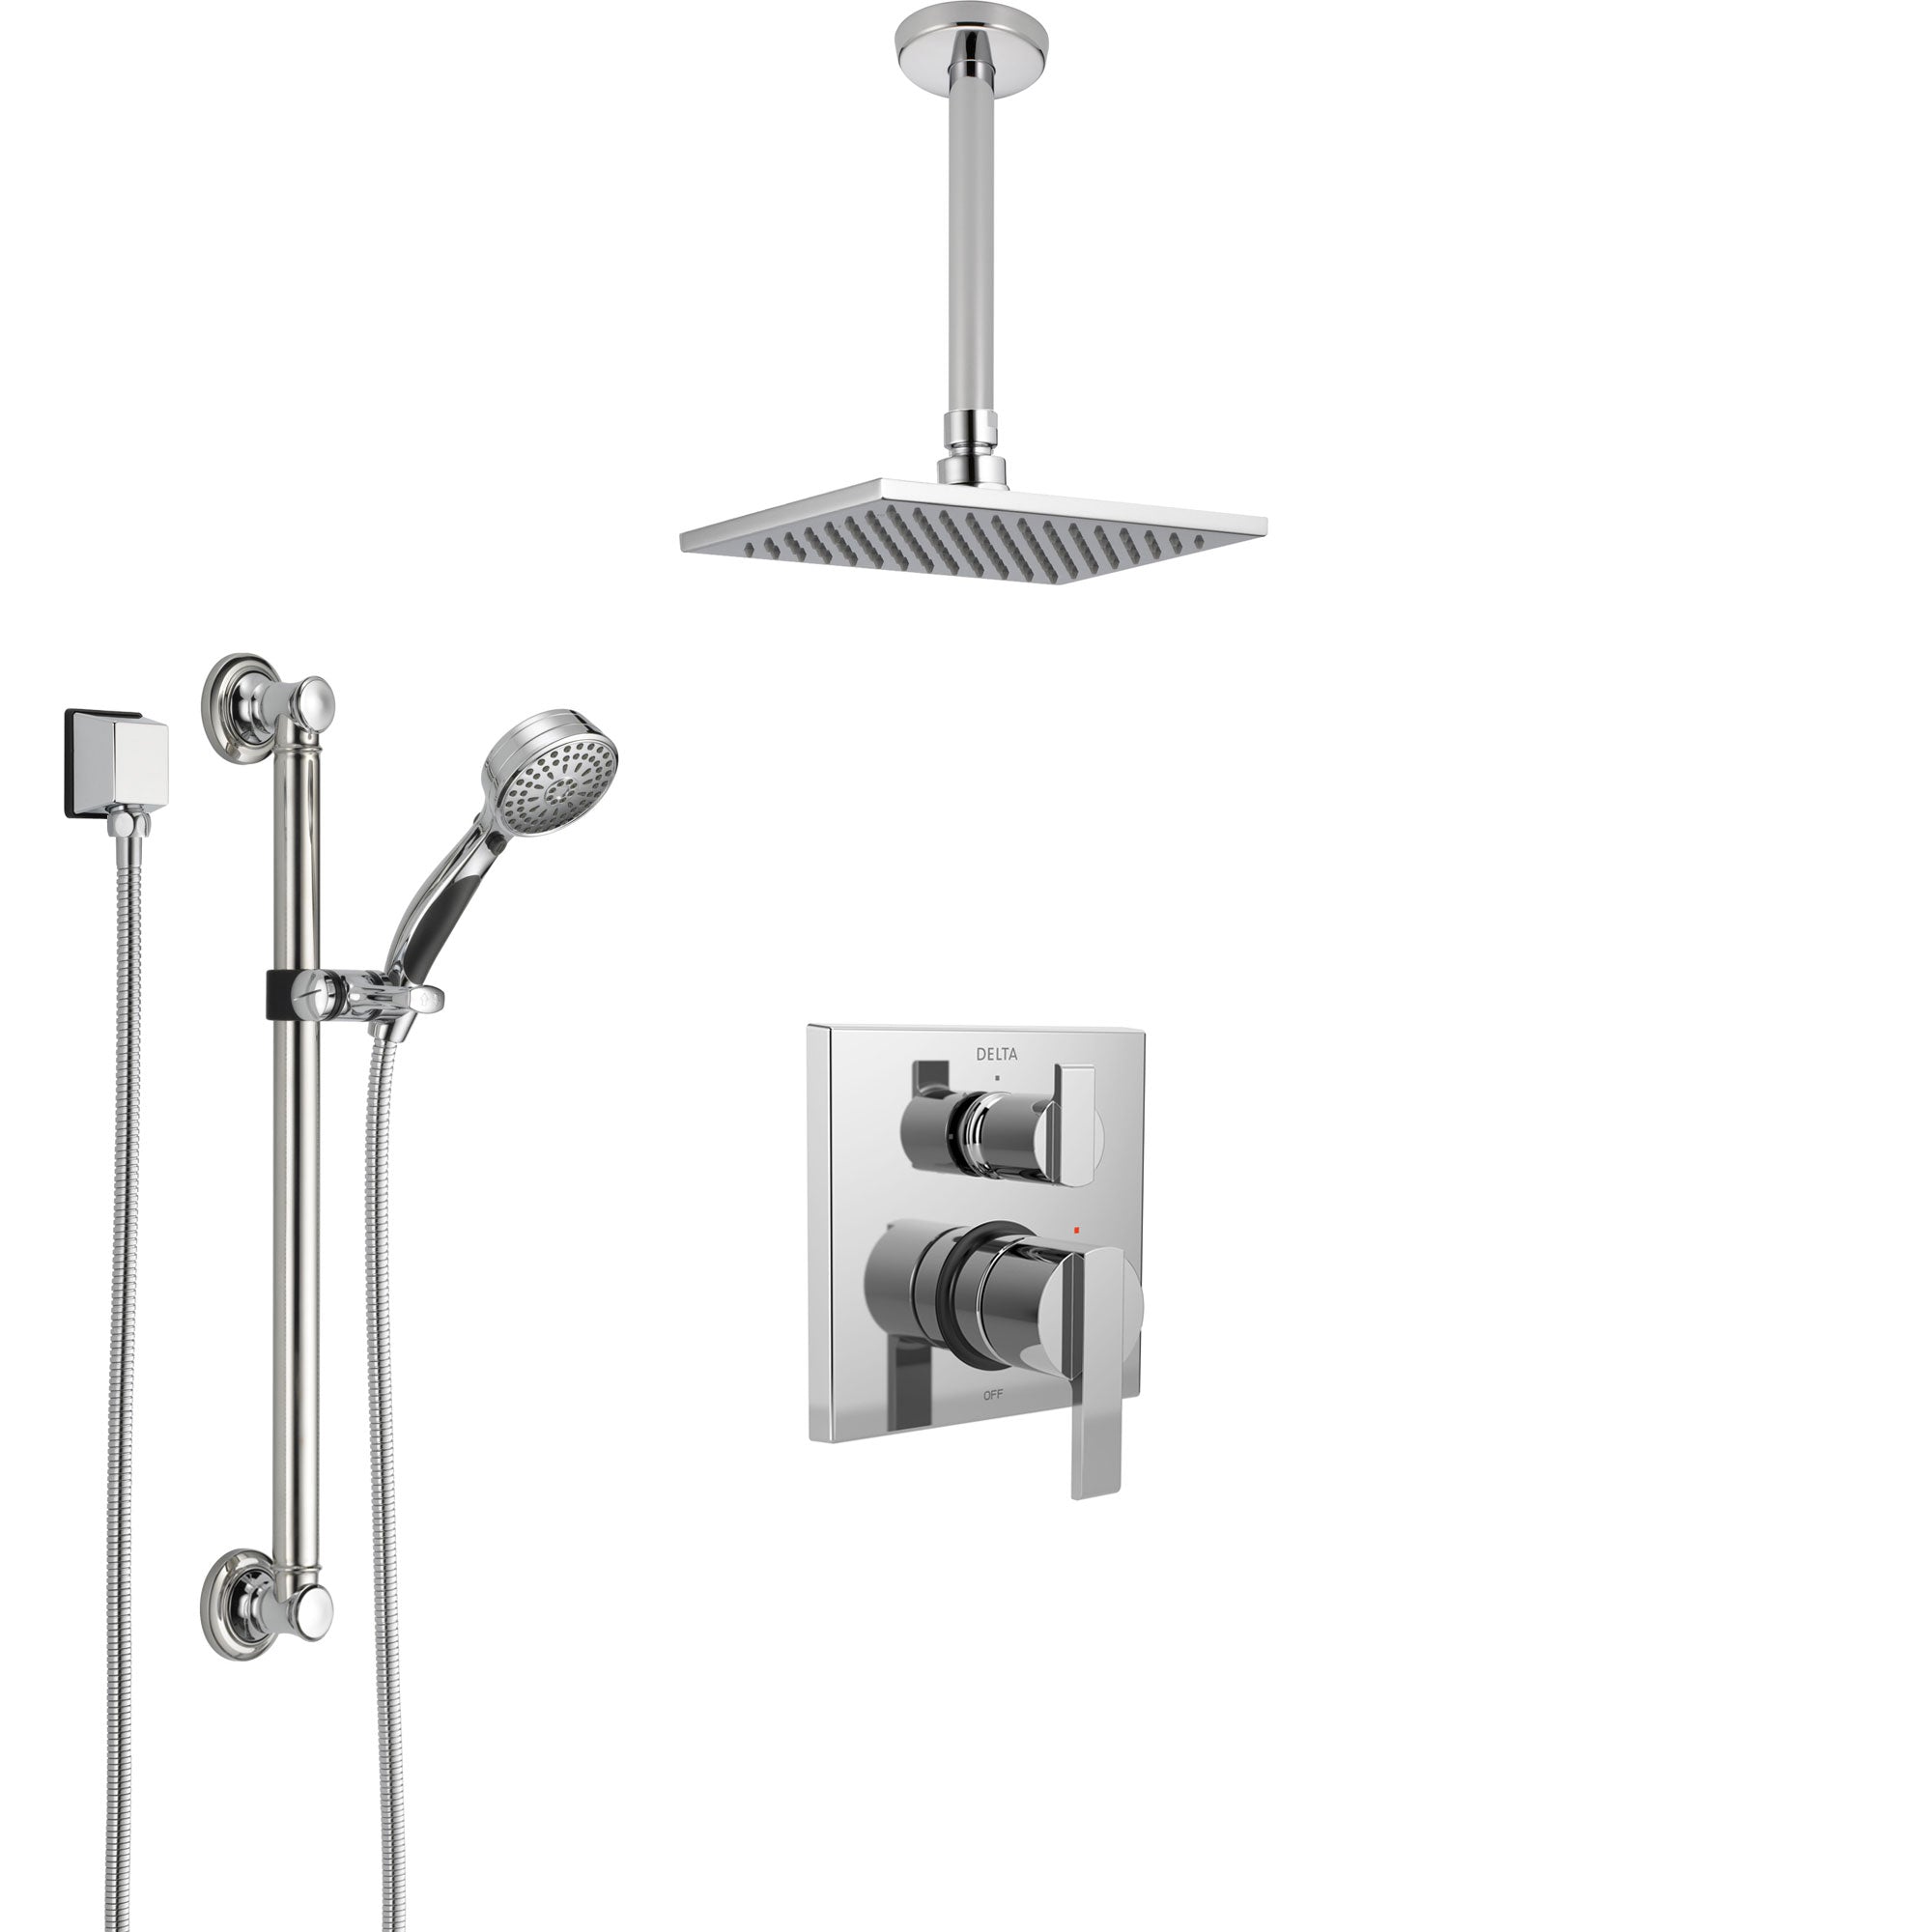 Delta Ara Chrome Finish Shower System with Control Handle, Integrated Diverter, Ceiling Mount Showerhead, and Hand Shower with Grab Bar SS248679